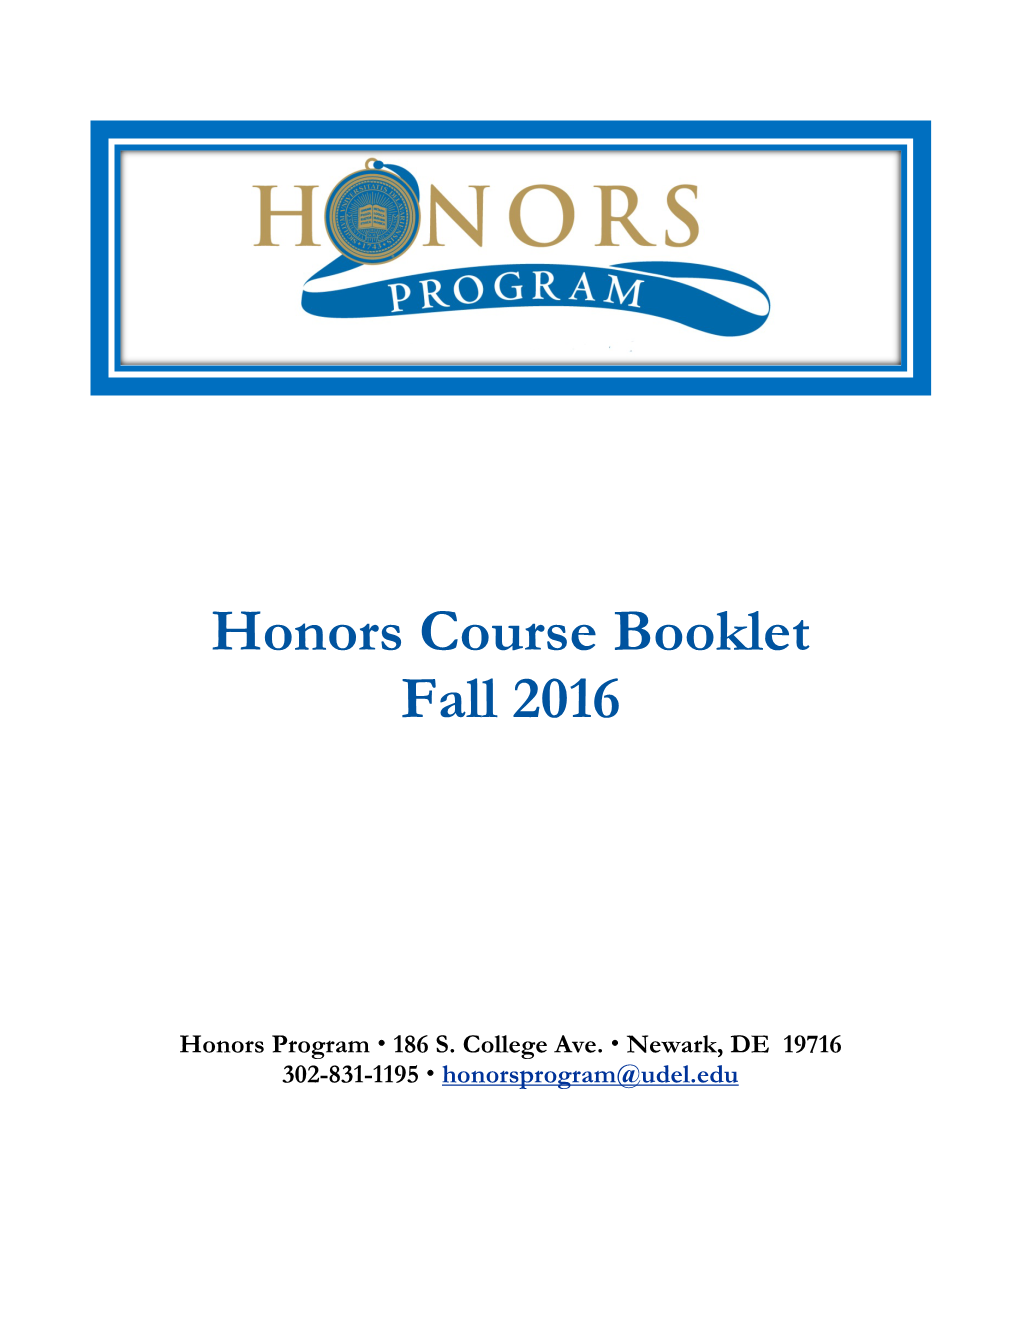 Fall 2016 Honors Courses